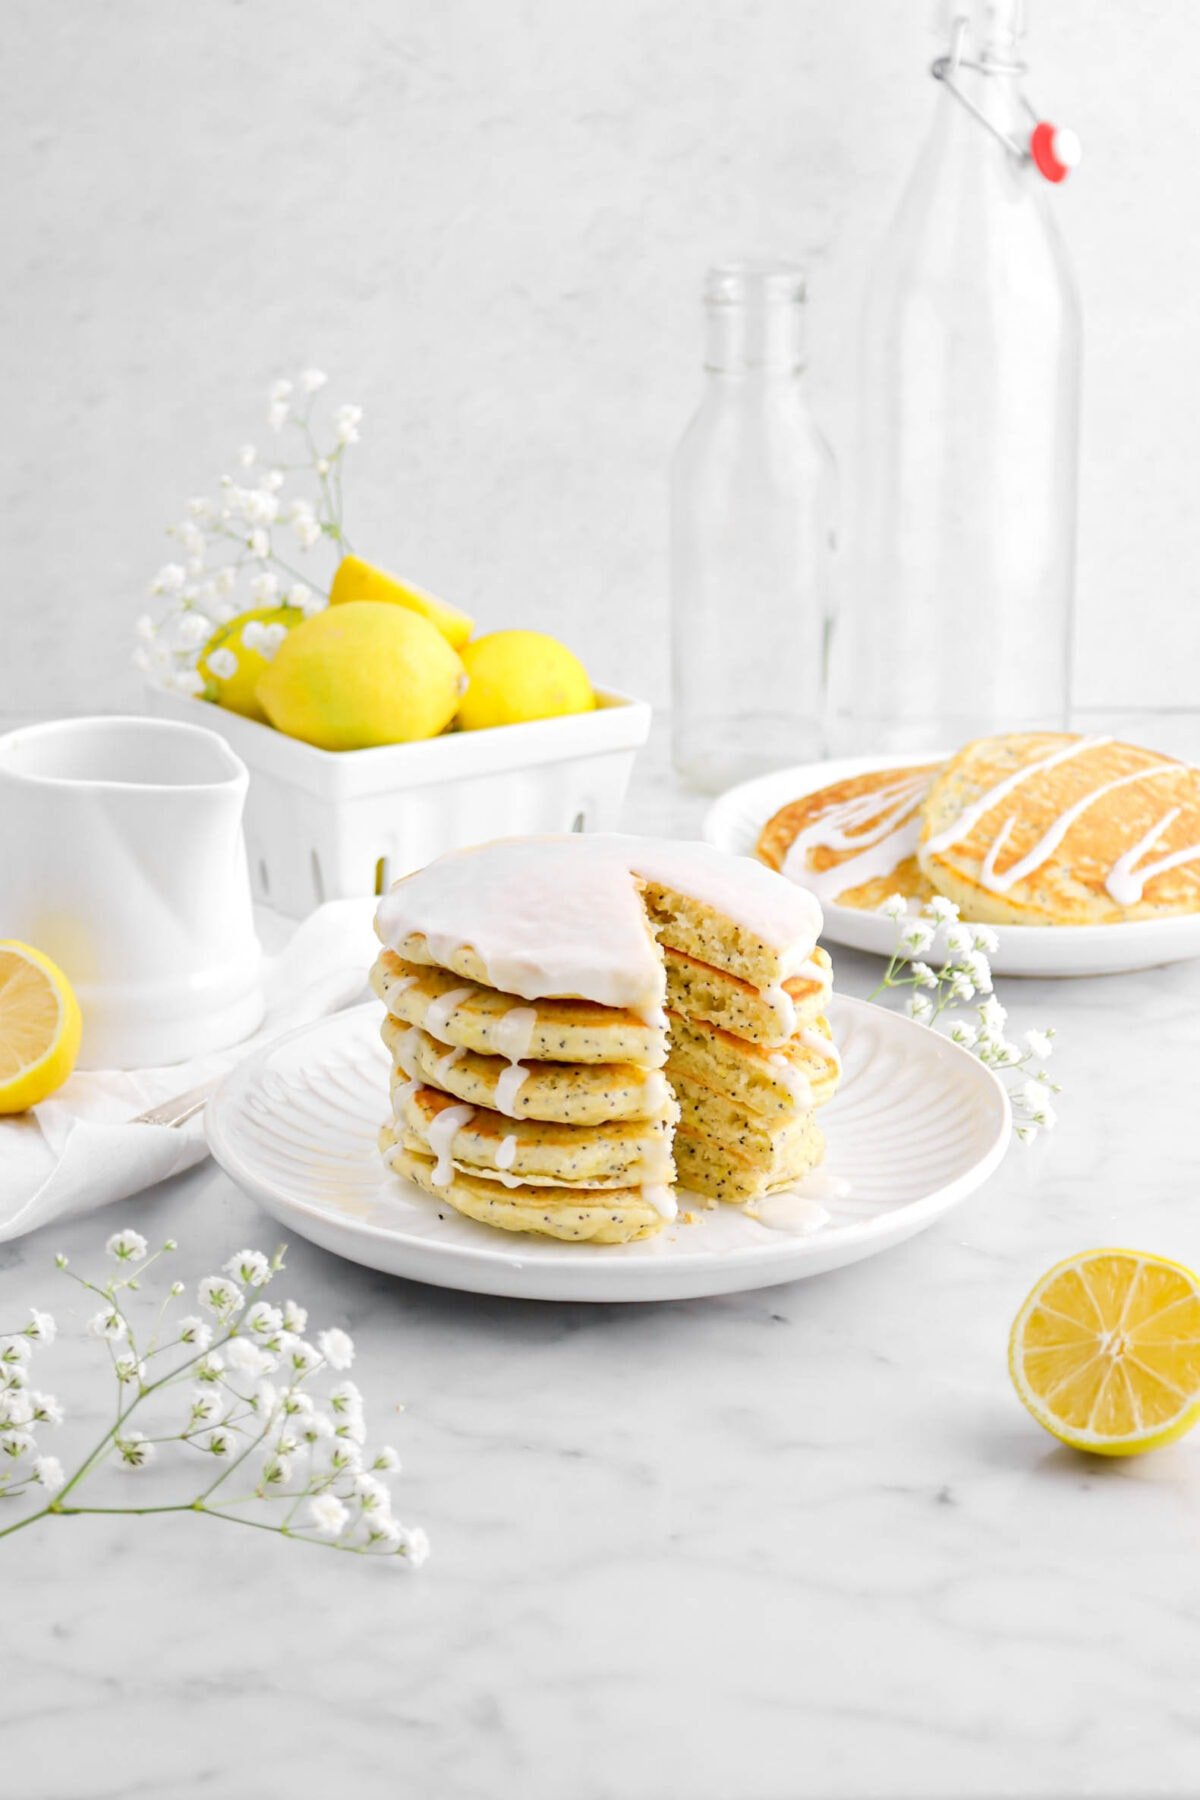 pulled back shot of stacked lemon poppy seed pancakes with icing dripping down the sides, lemons and white flowers around, and another plate of pancakes behind.